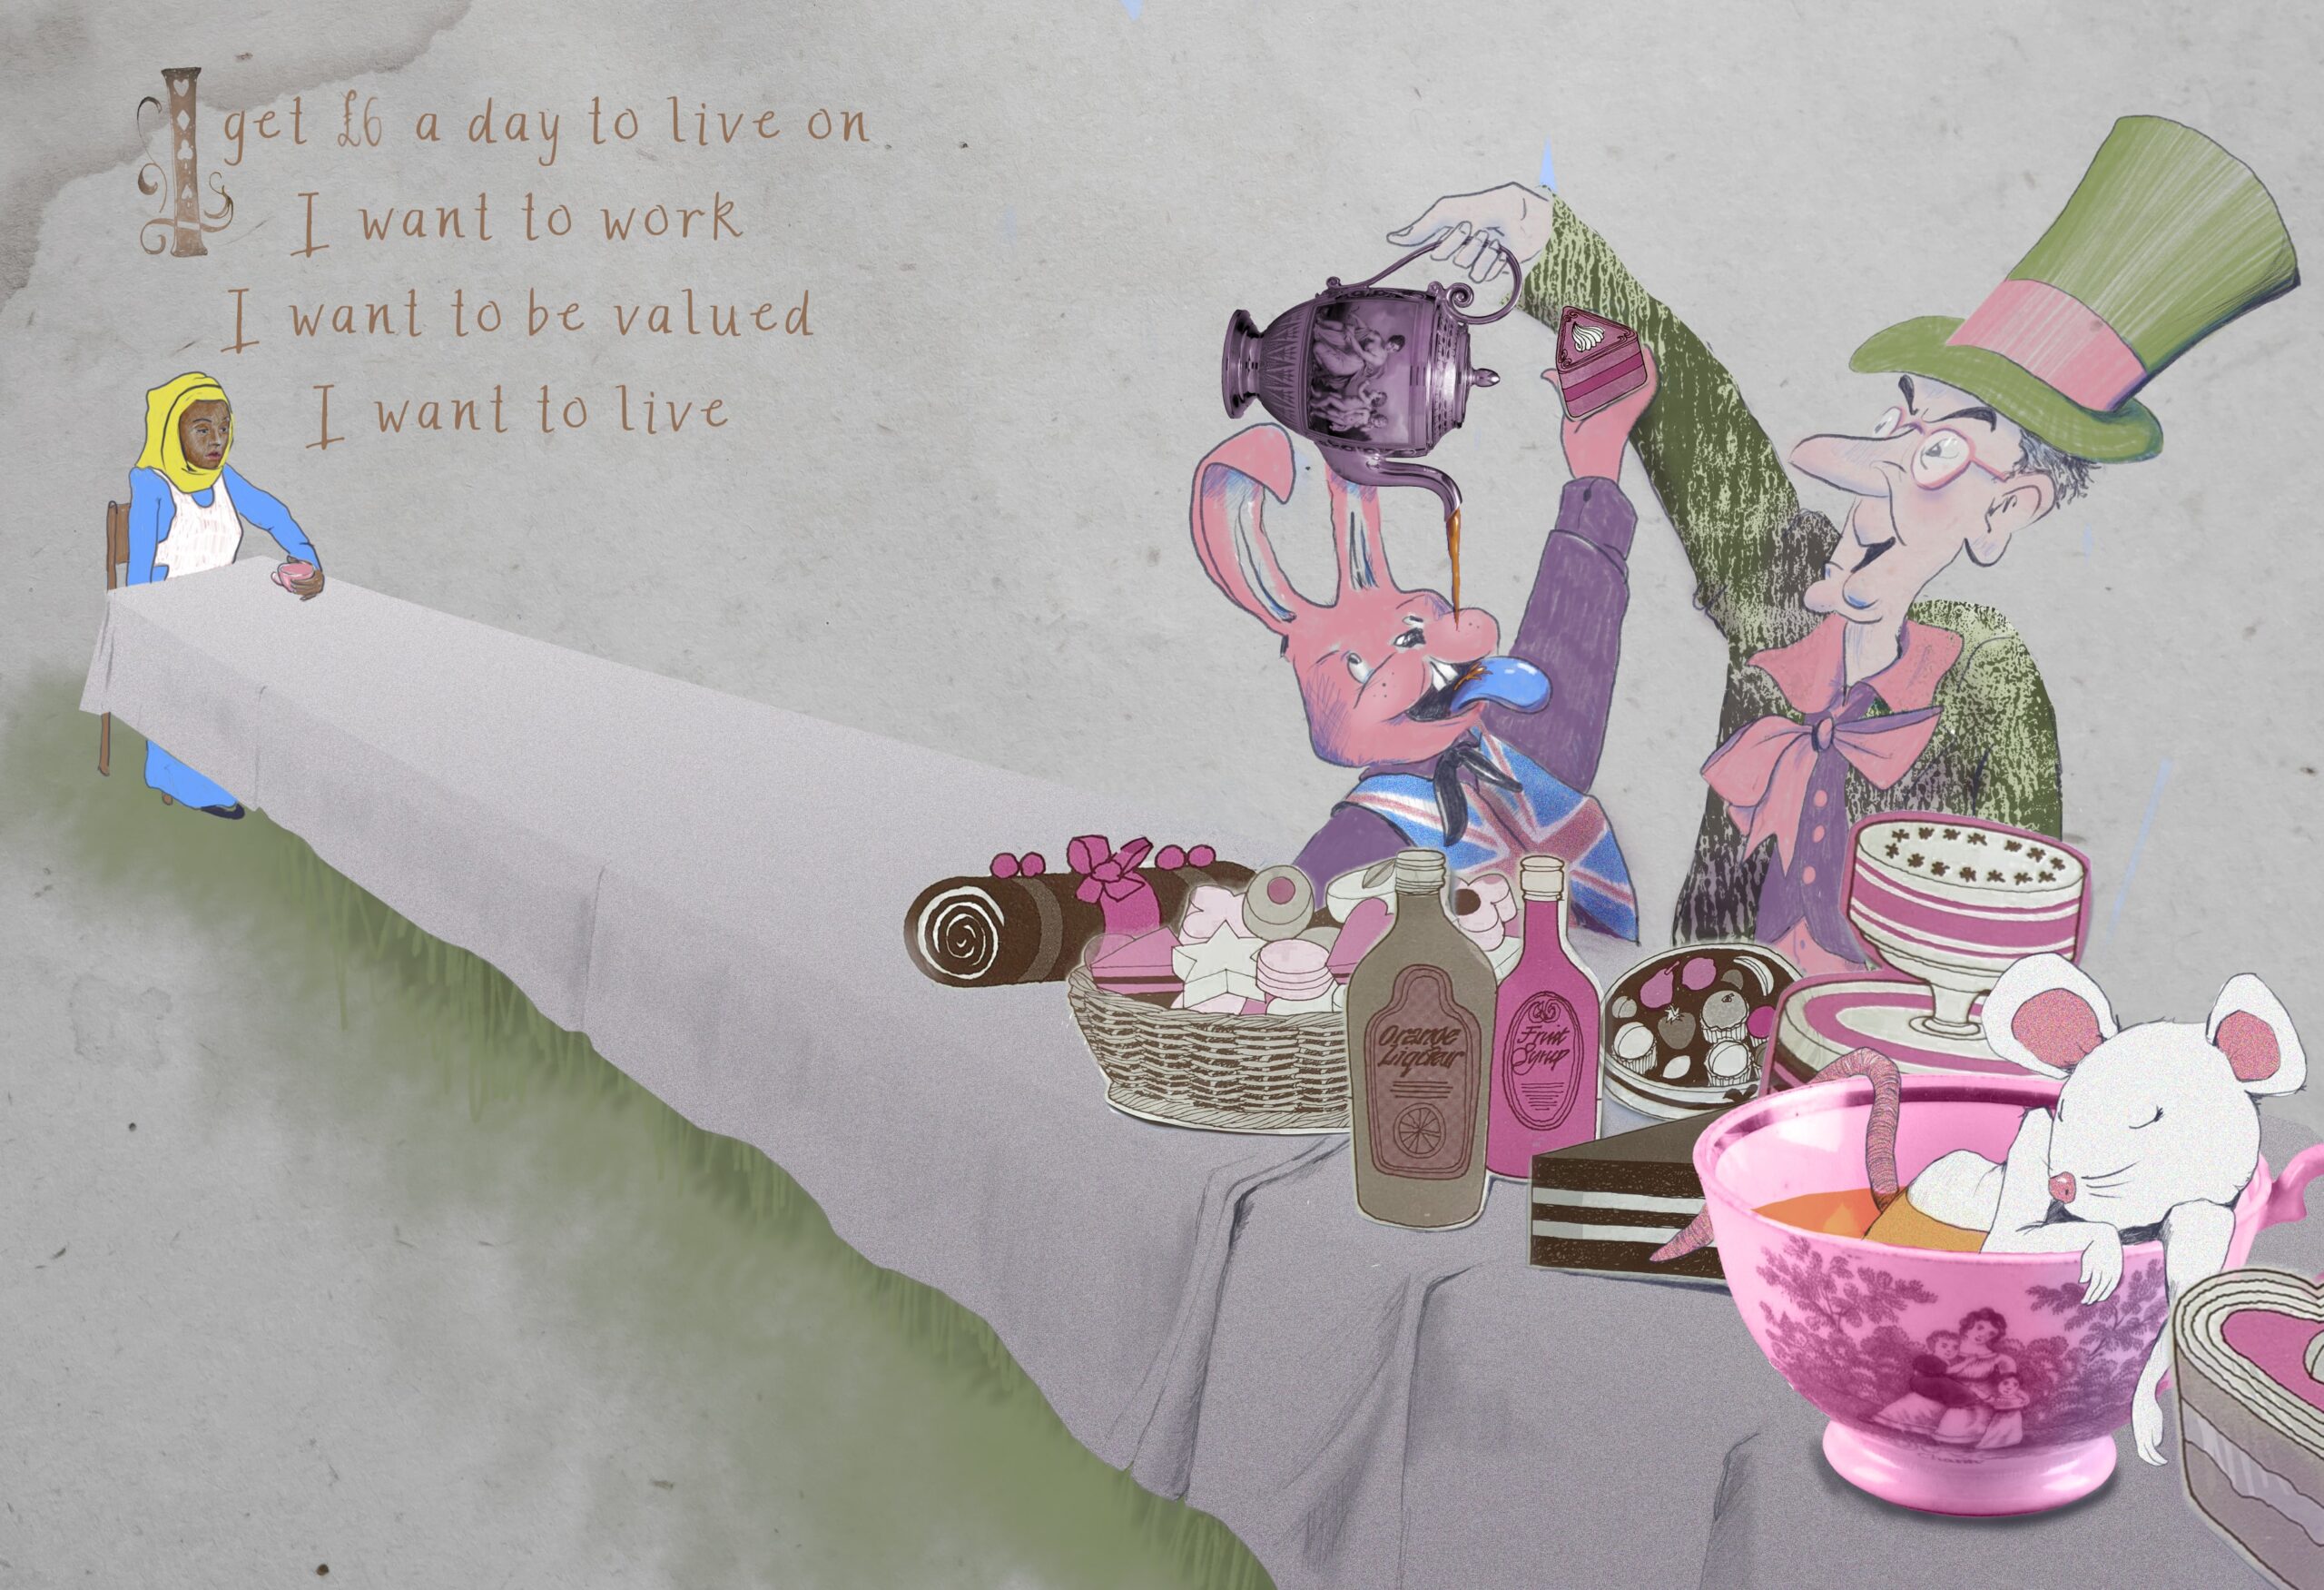 Alice sits at the far end of the table. To the right of the image a man in a top hat pours tea into the mouth of a rabbit in a Union Jack waste coat. They are all sat at a long table laid with a tea party. A mouse is sleeping in a cup. The caption reads "I get £6 a day to live on I want to work, I want to be valued, I want to live2